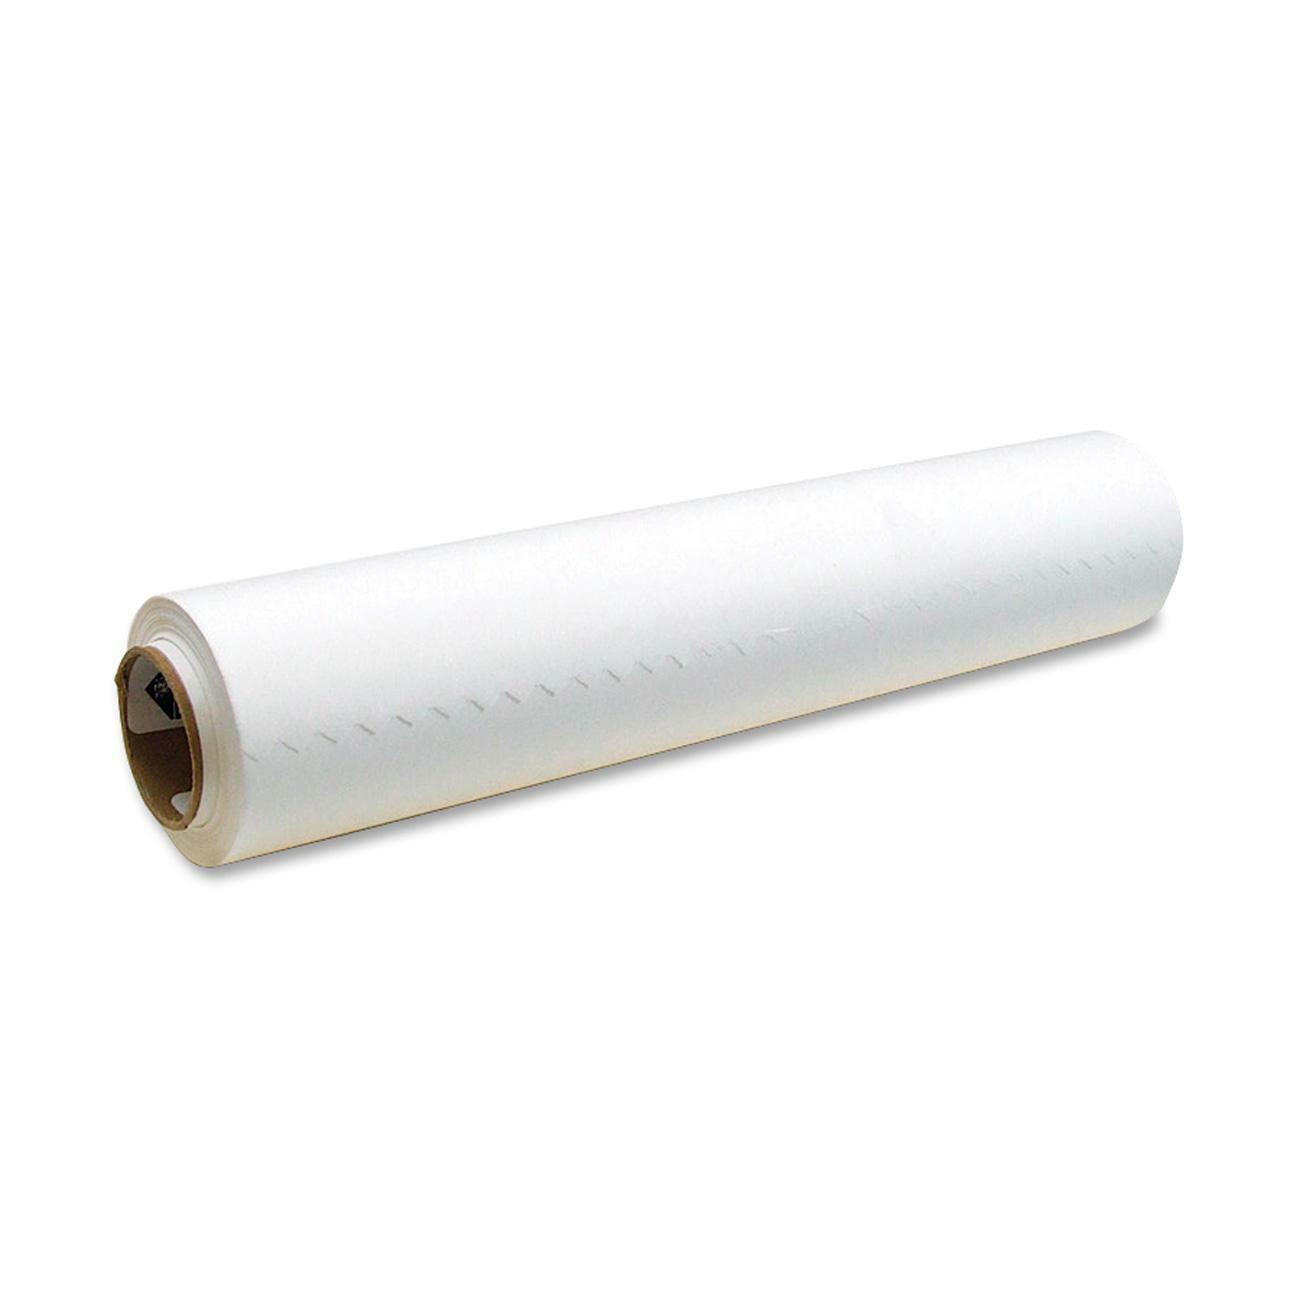 Bienfang Sketching & Tracing Paper Roll, 12W x 150'L, White (12176)